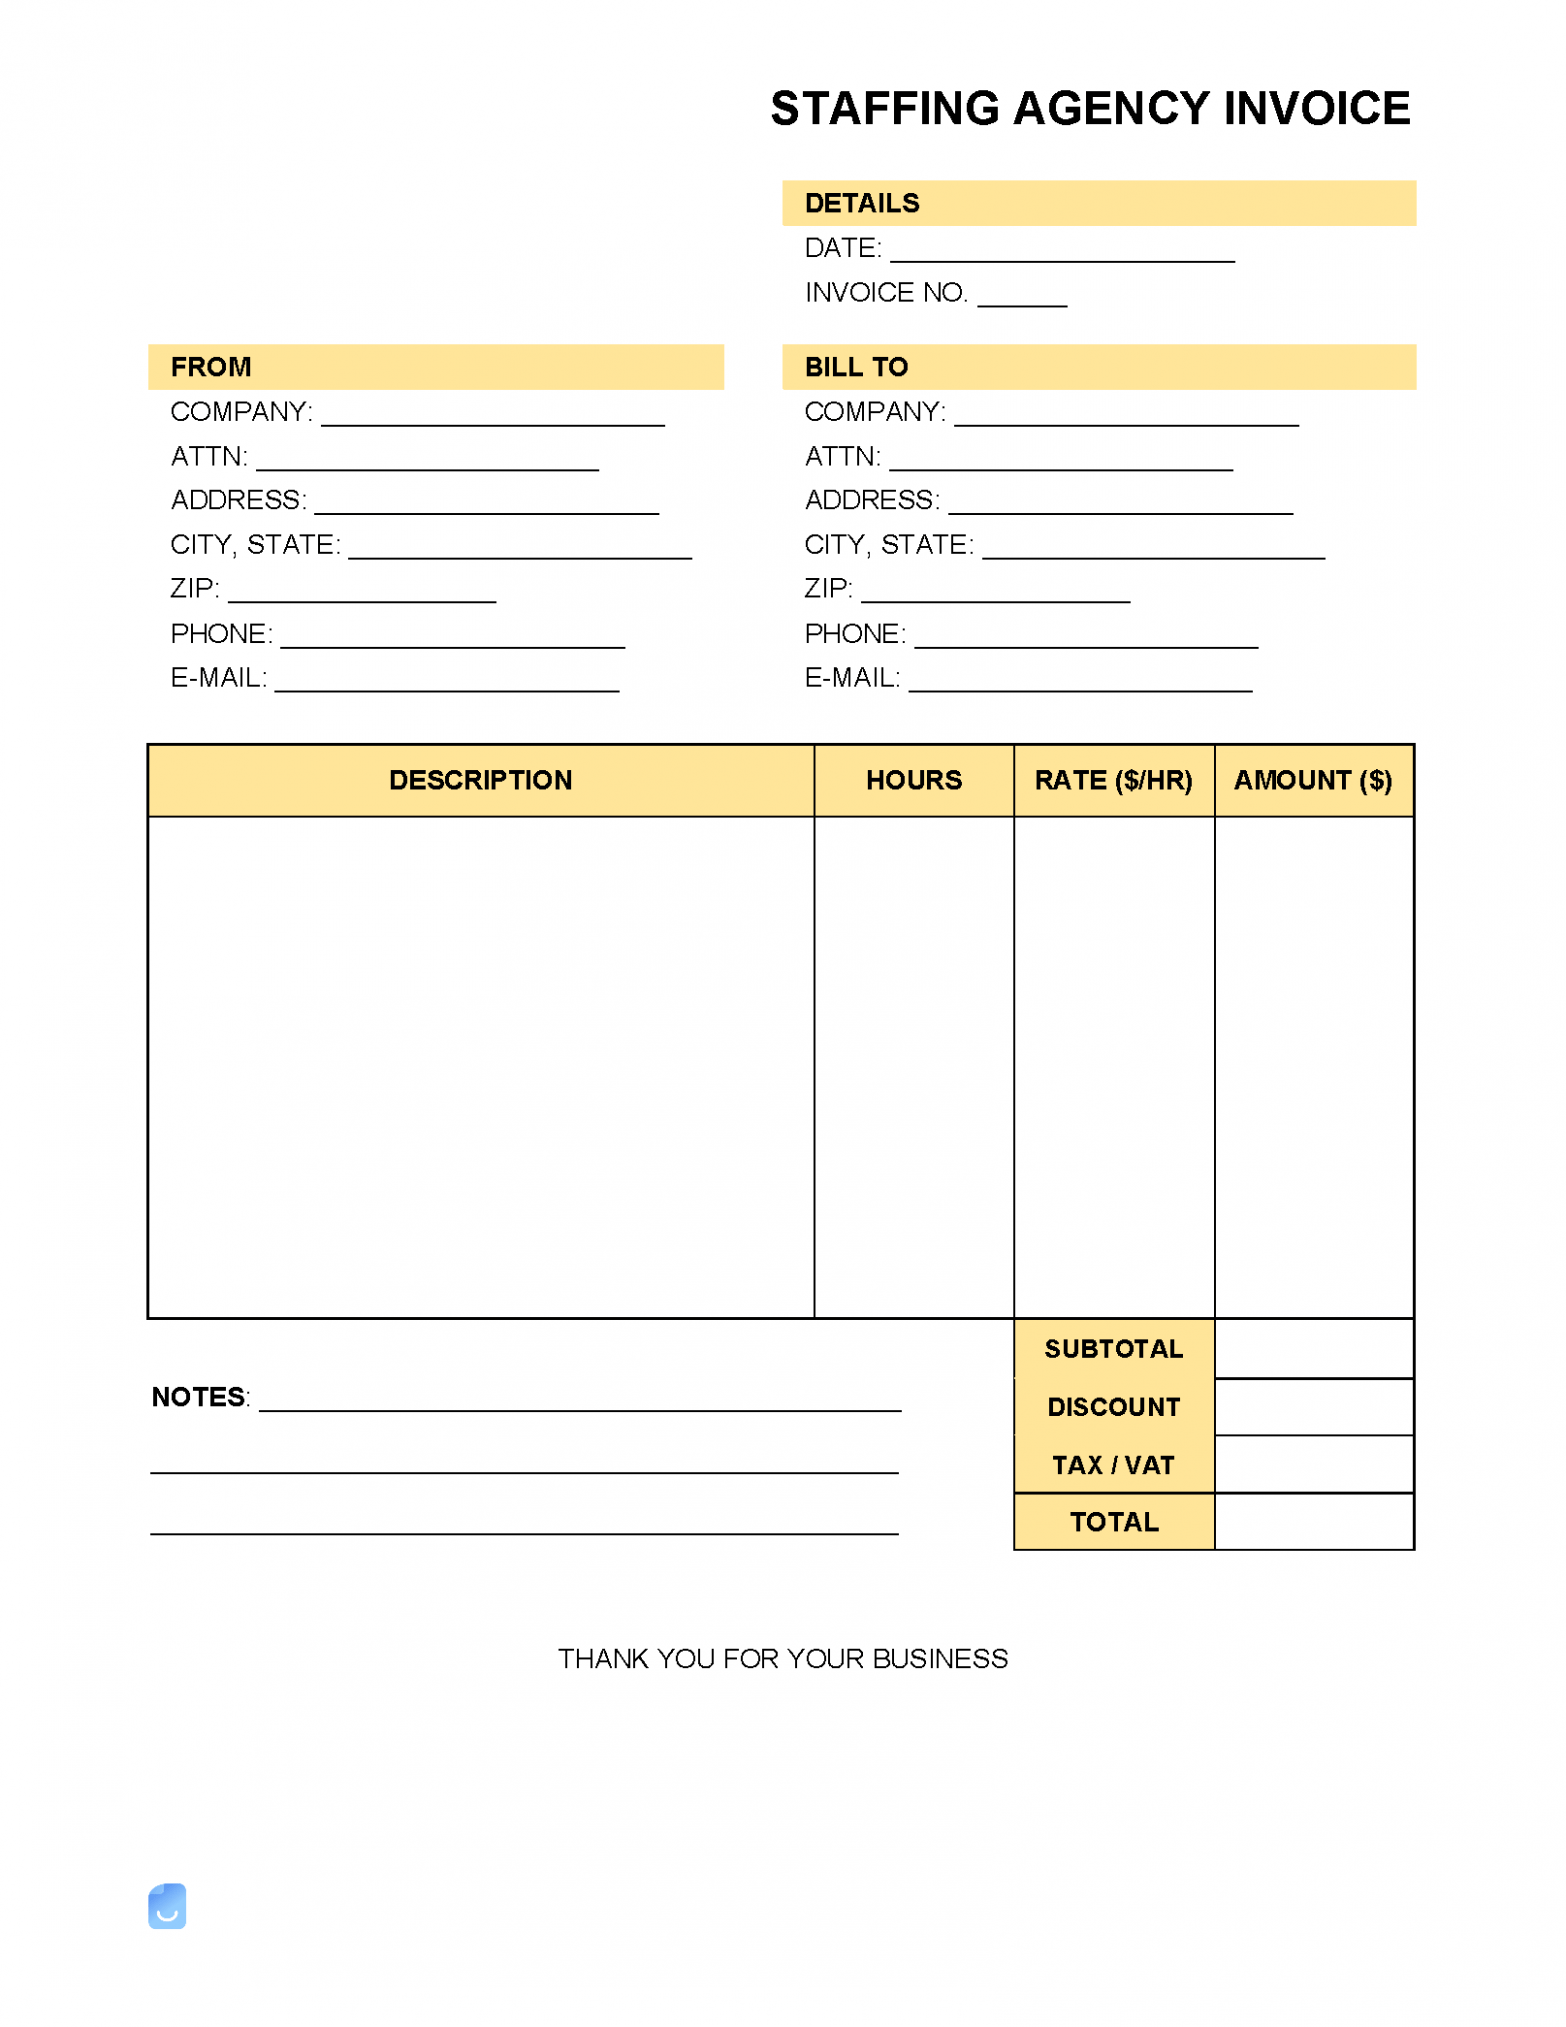 Editable Staffing Agency Invoice Template Sample